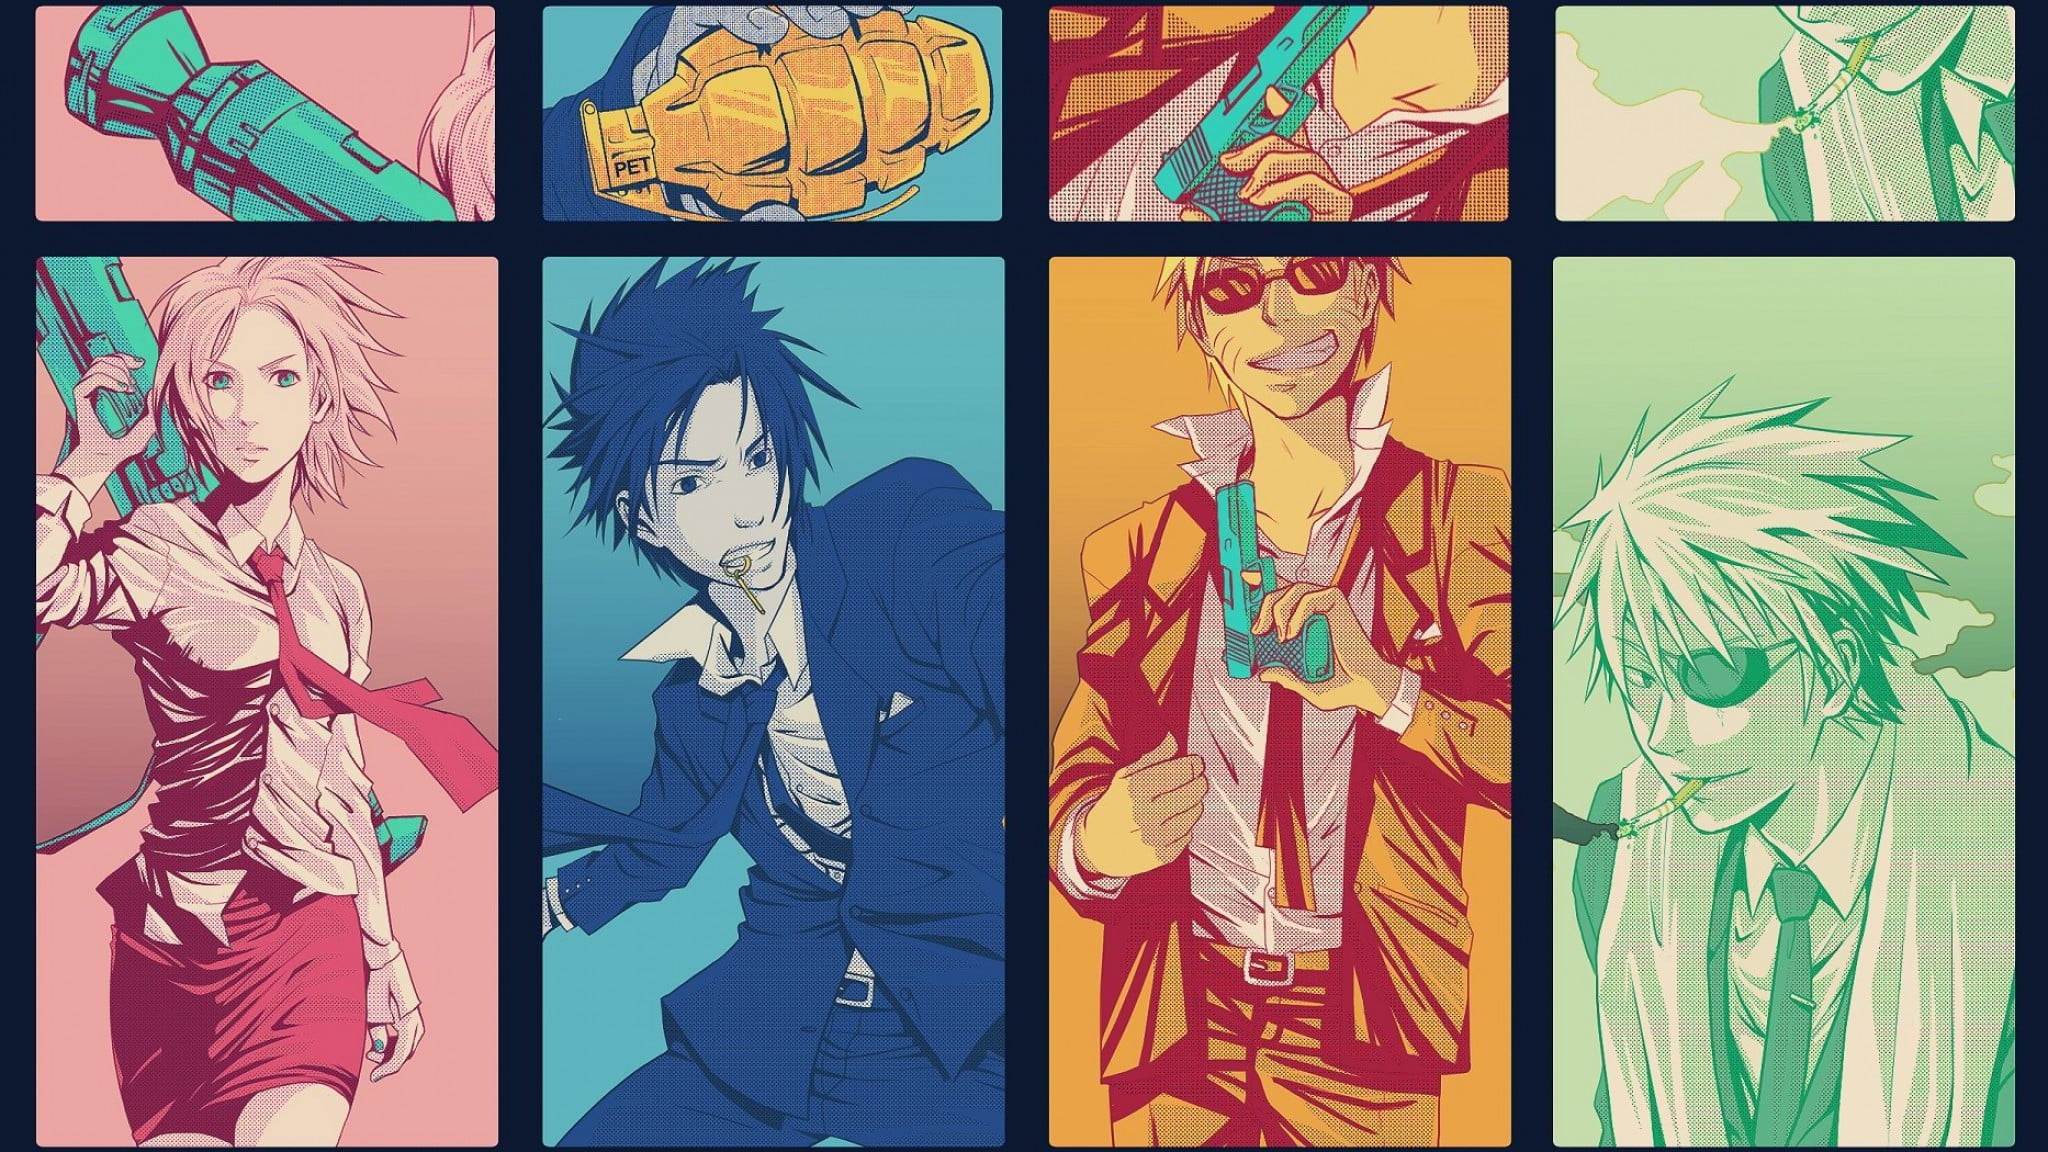 assorted anime characters illustration